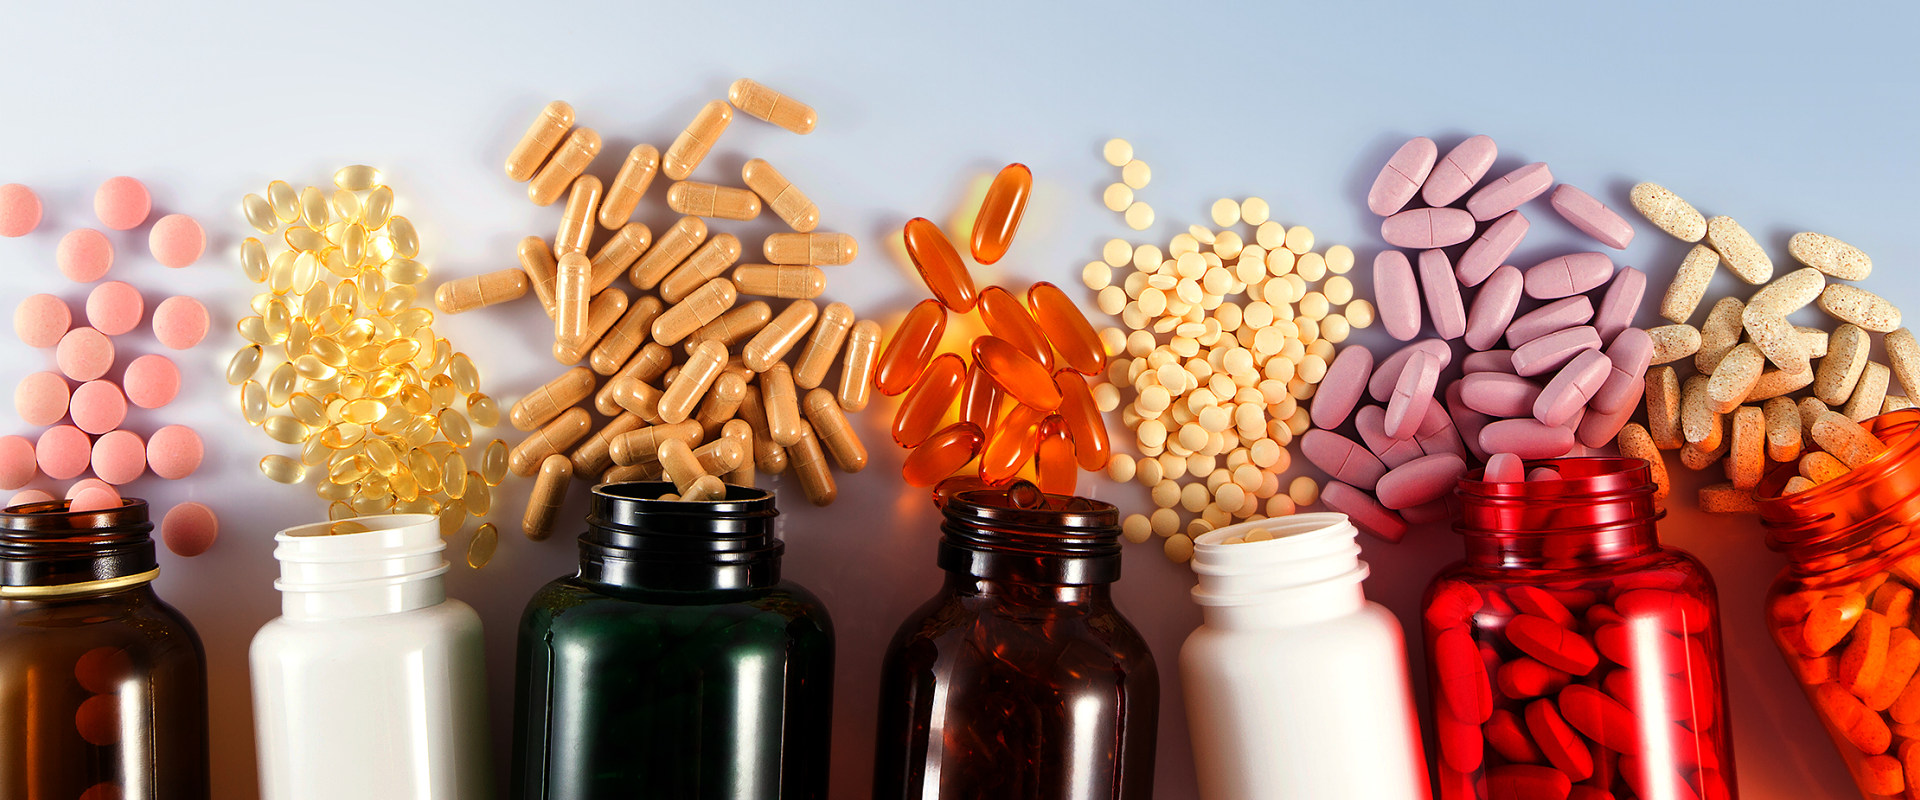 Nutritional Supplements for Optimal Health: How to Take Them